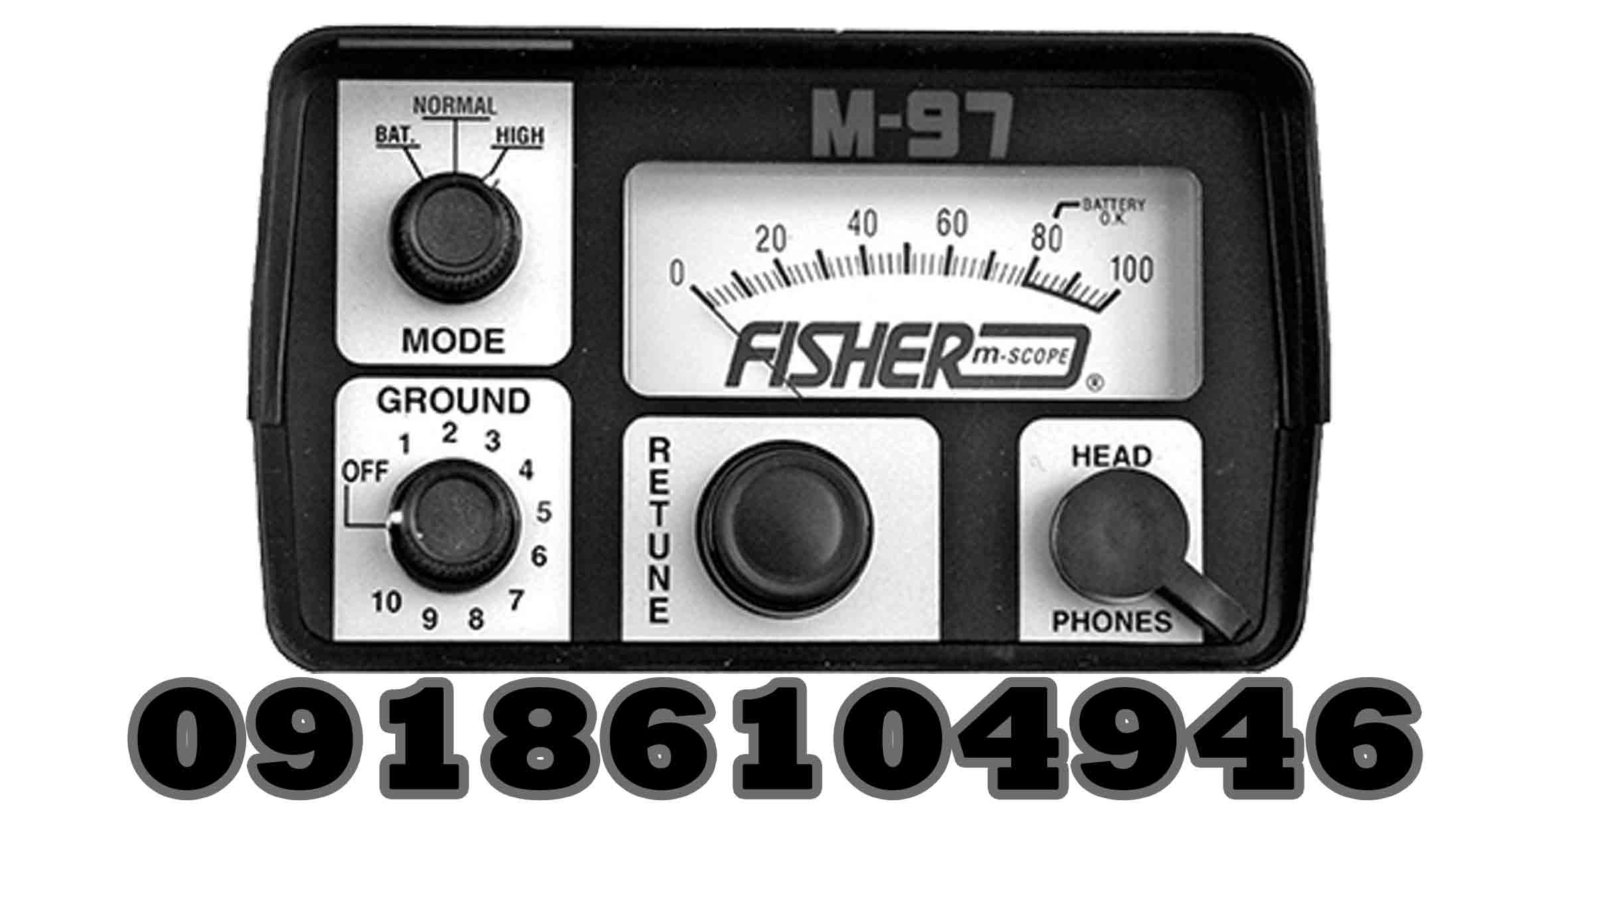 Fisher M-97